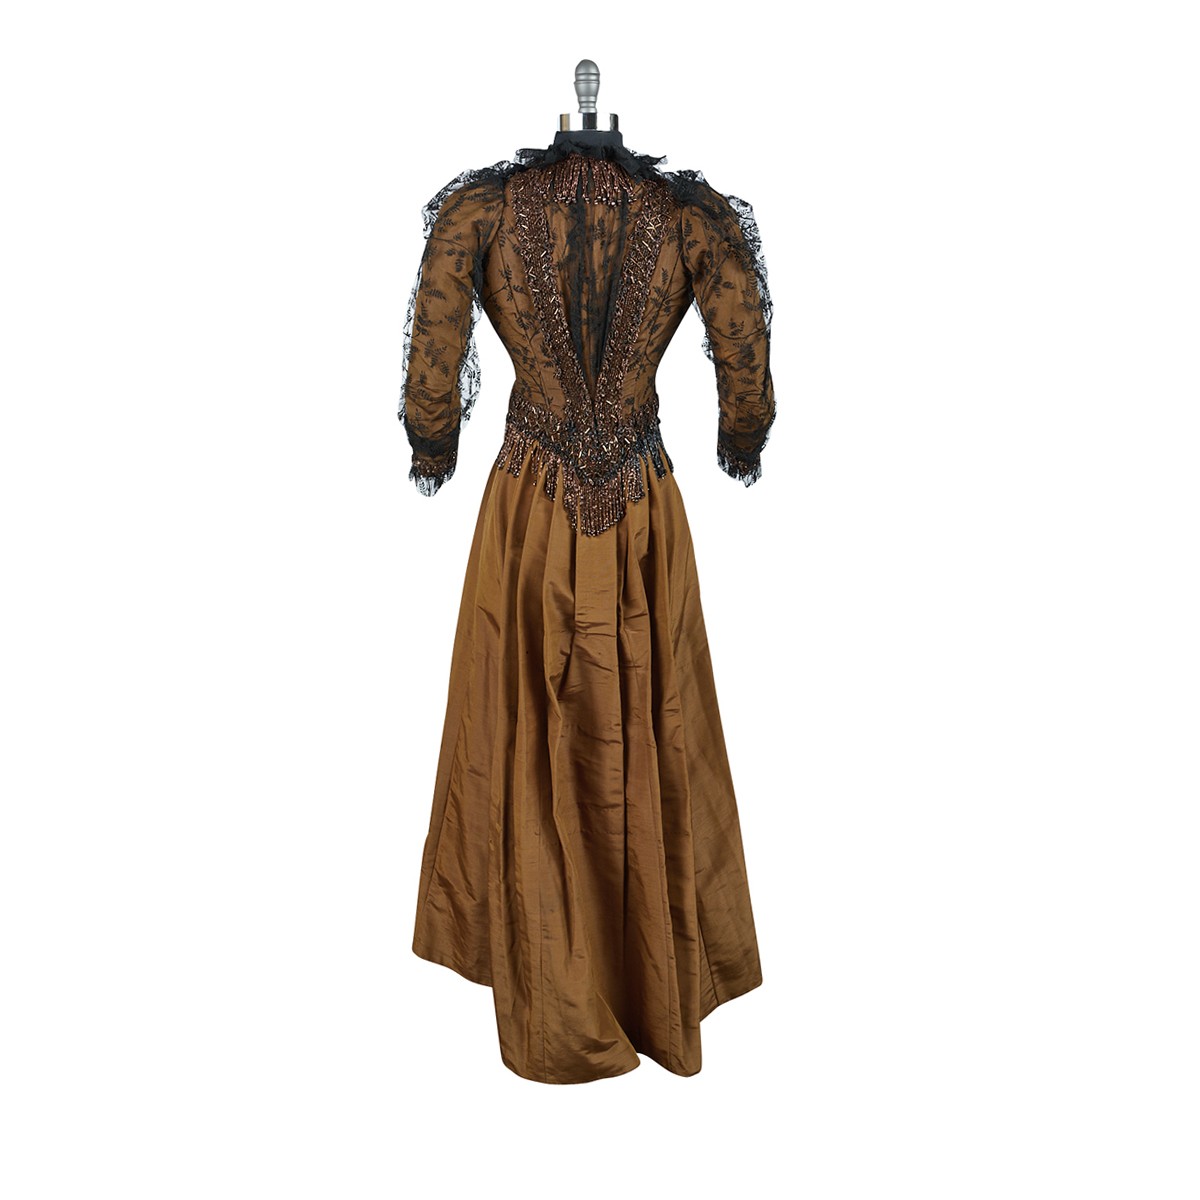 1890s Evening Dress w/ Lace & Beadwork - Image 3 of 8